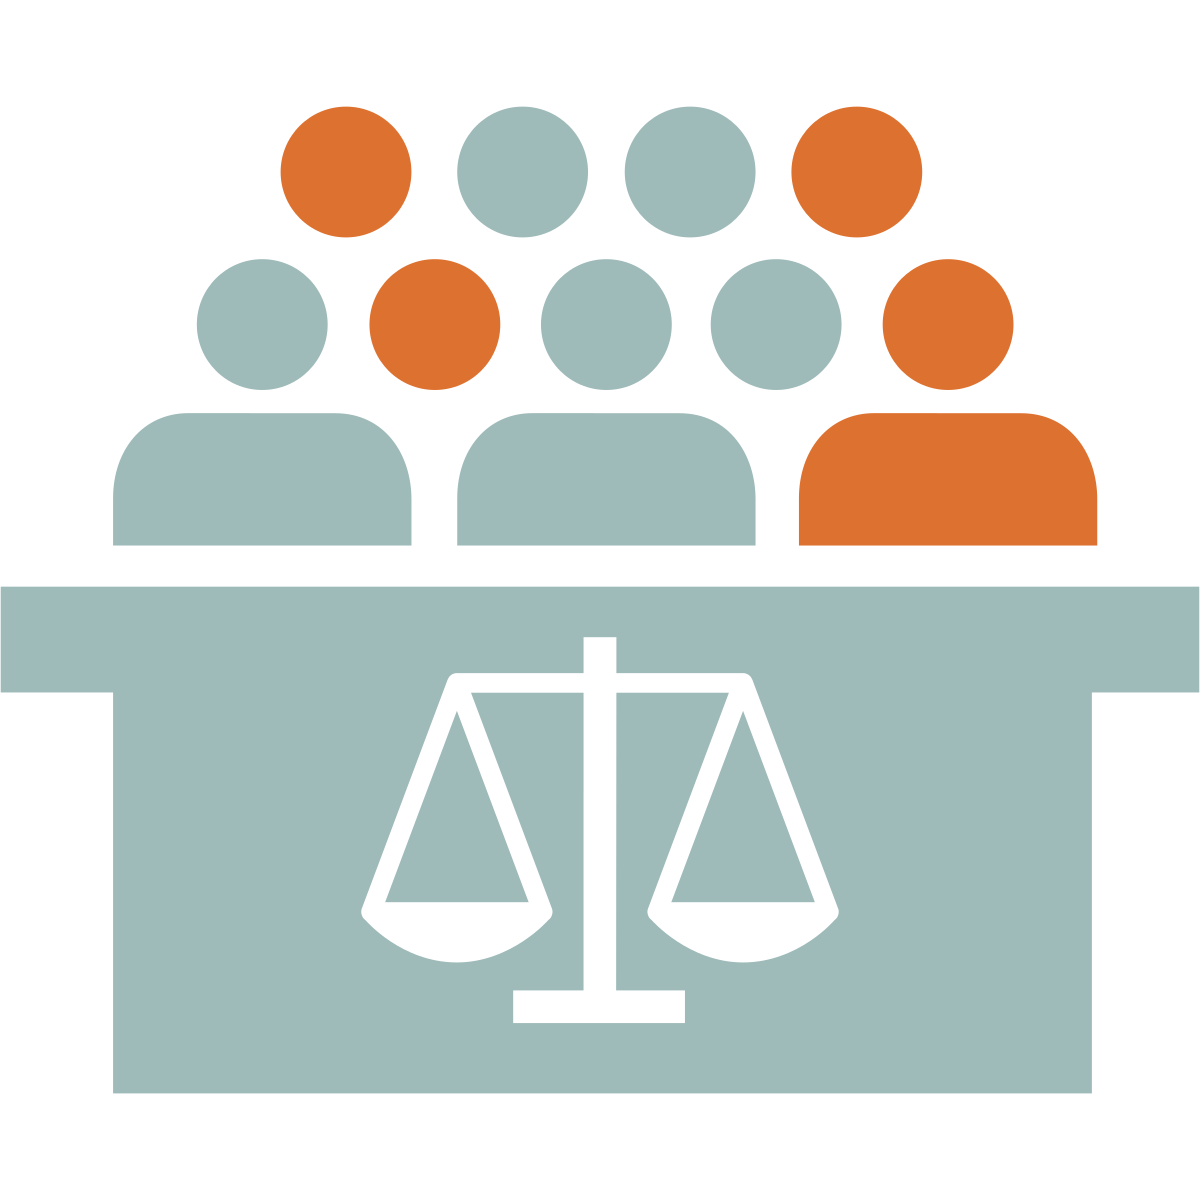 Vector image of a mixed court